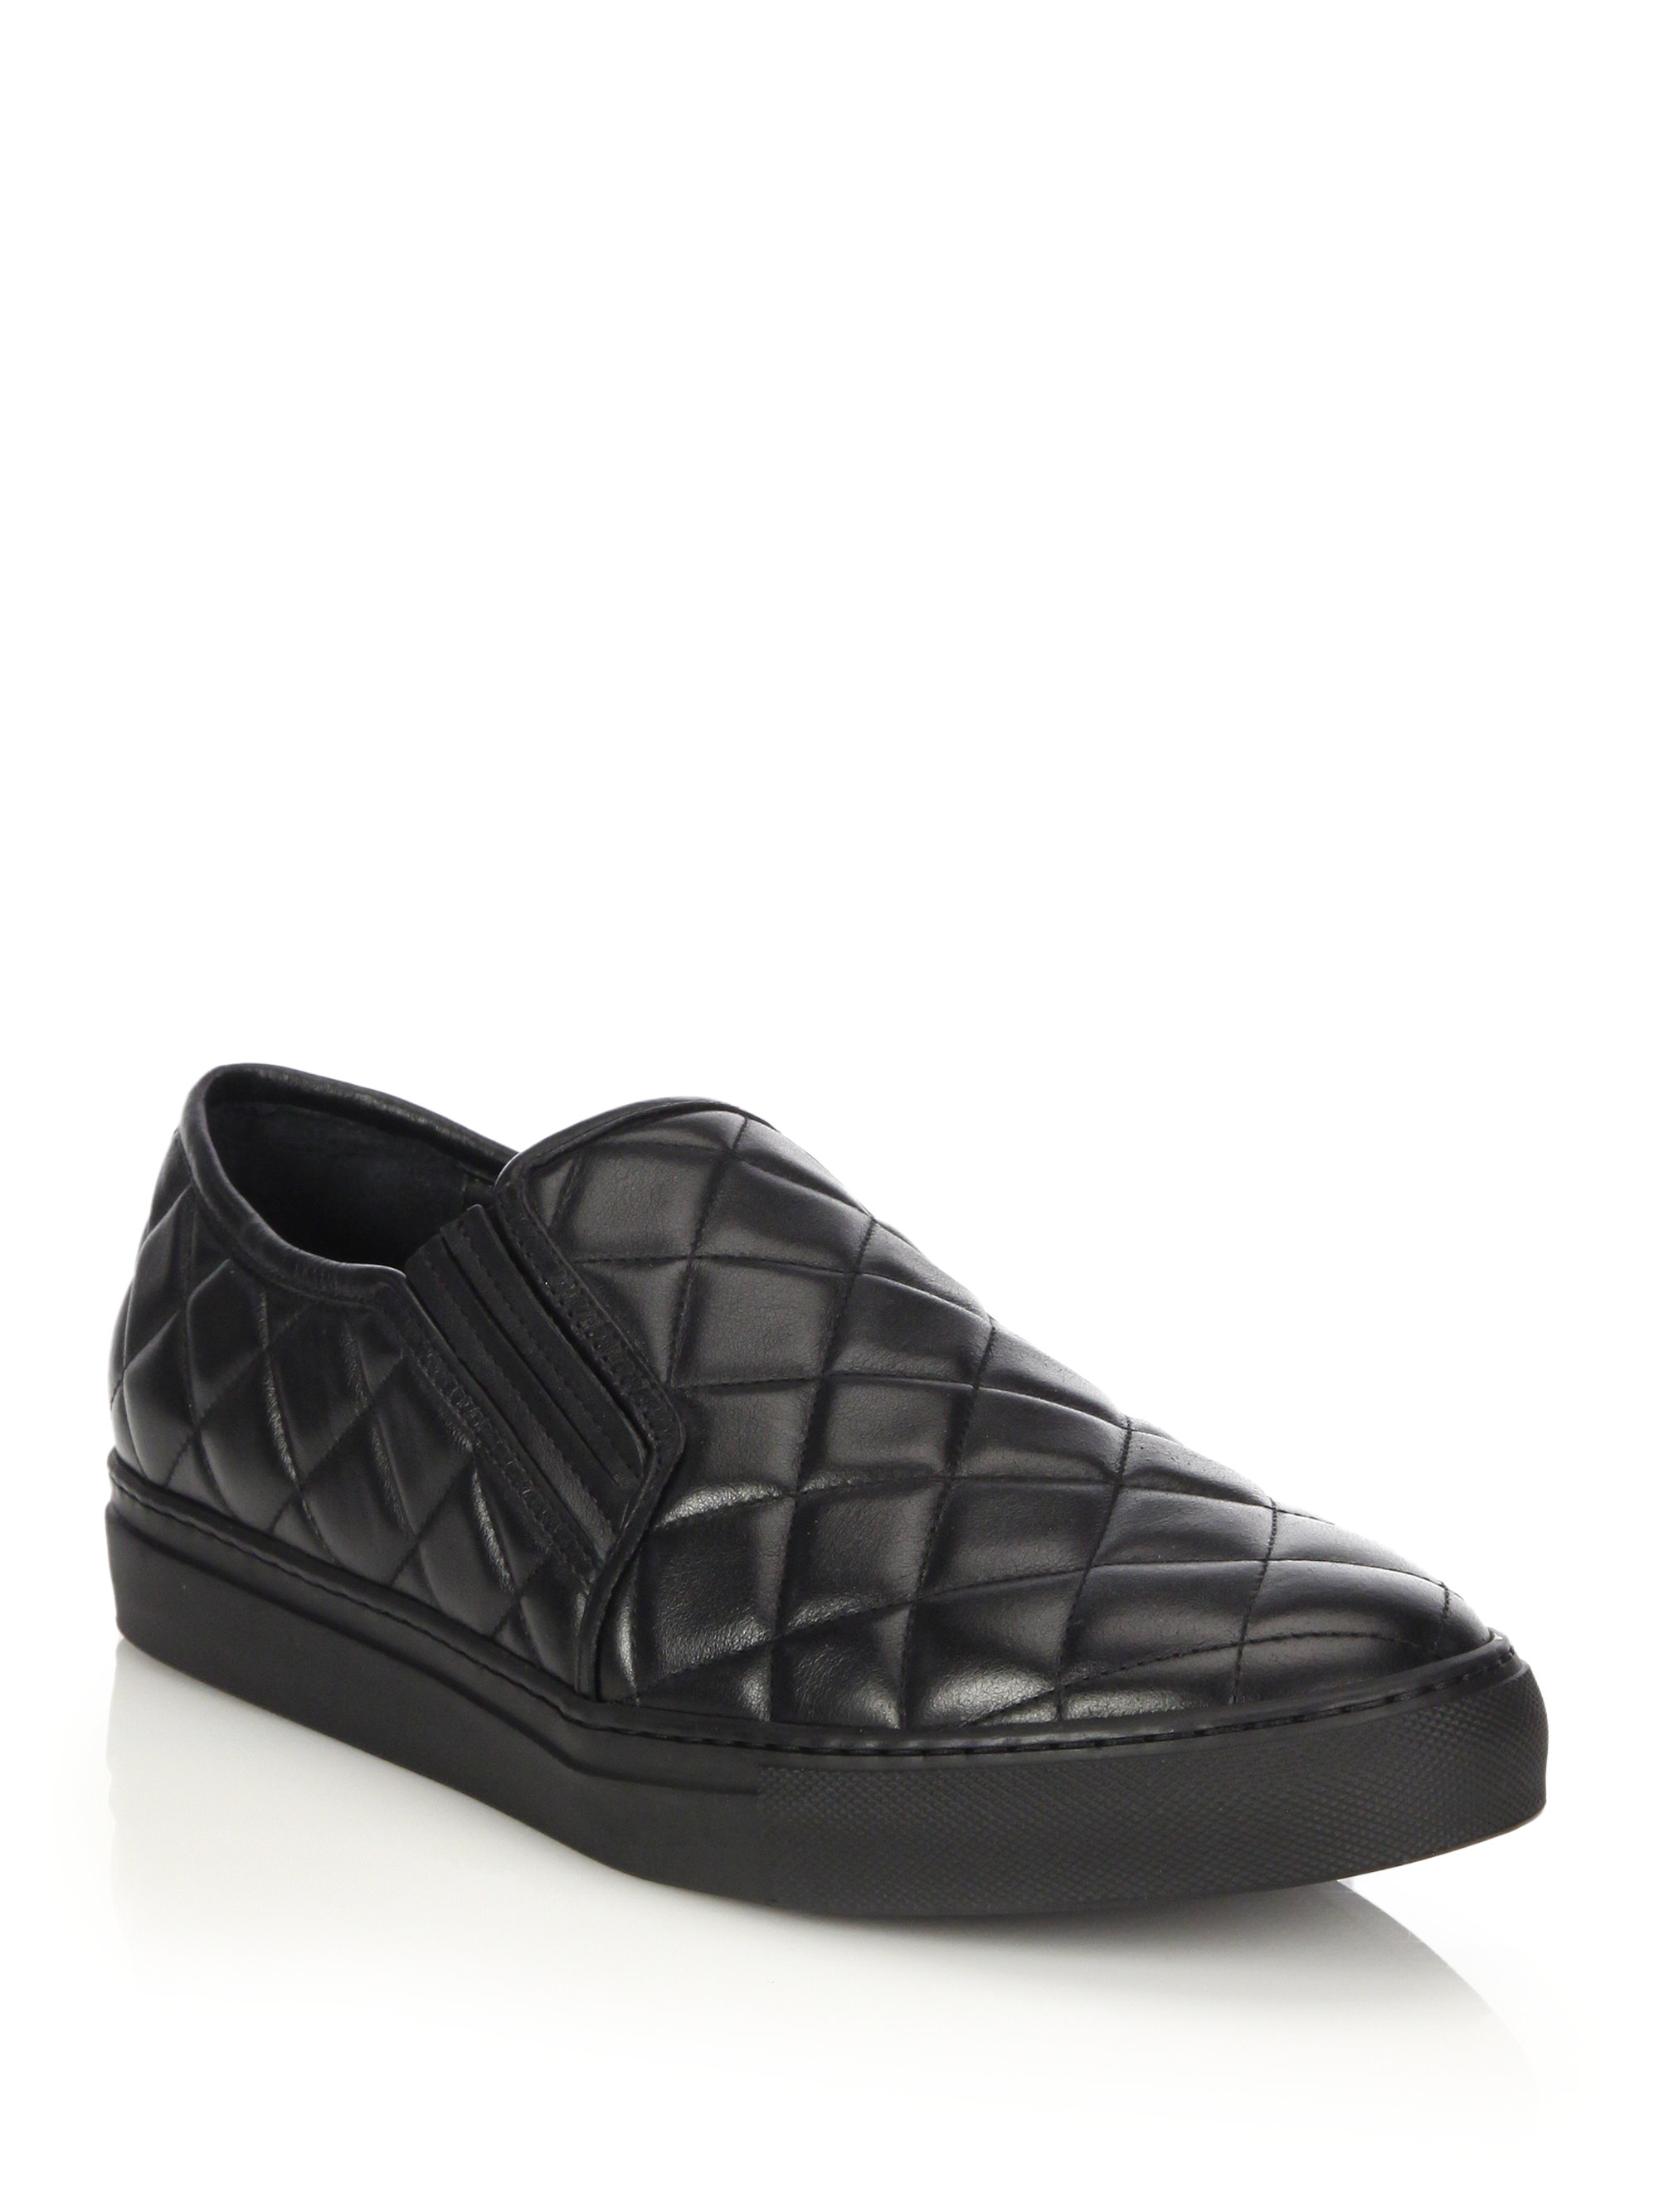 Quilted Sneakers in Black for Men - Lyst